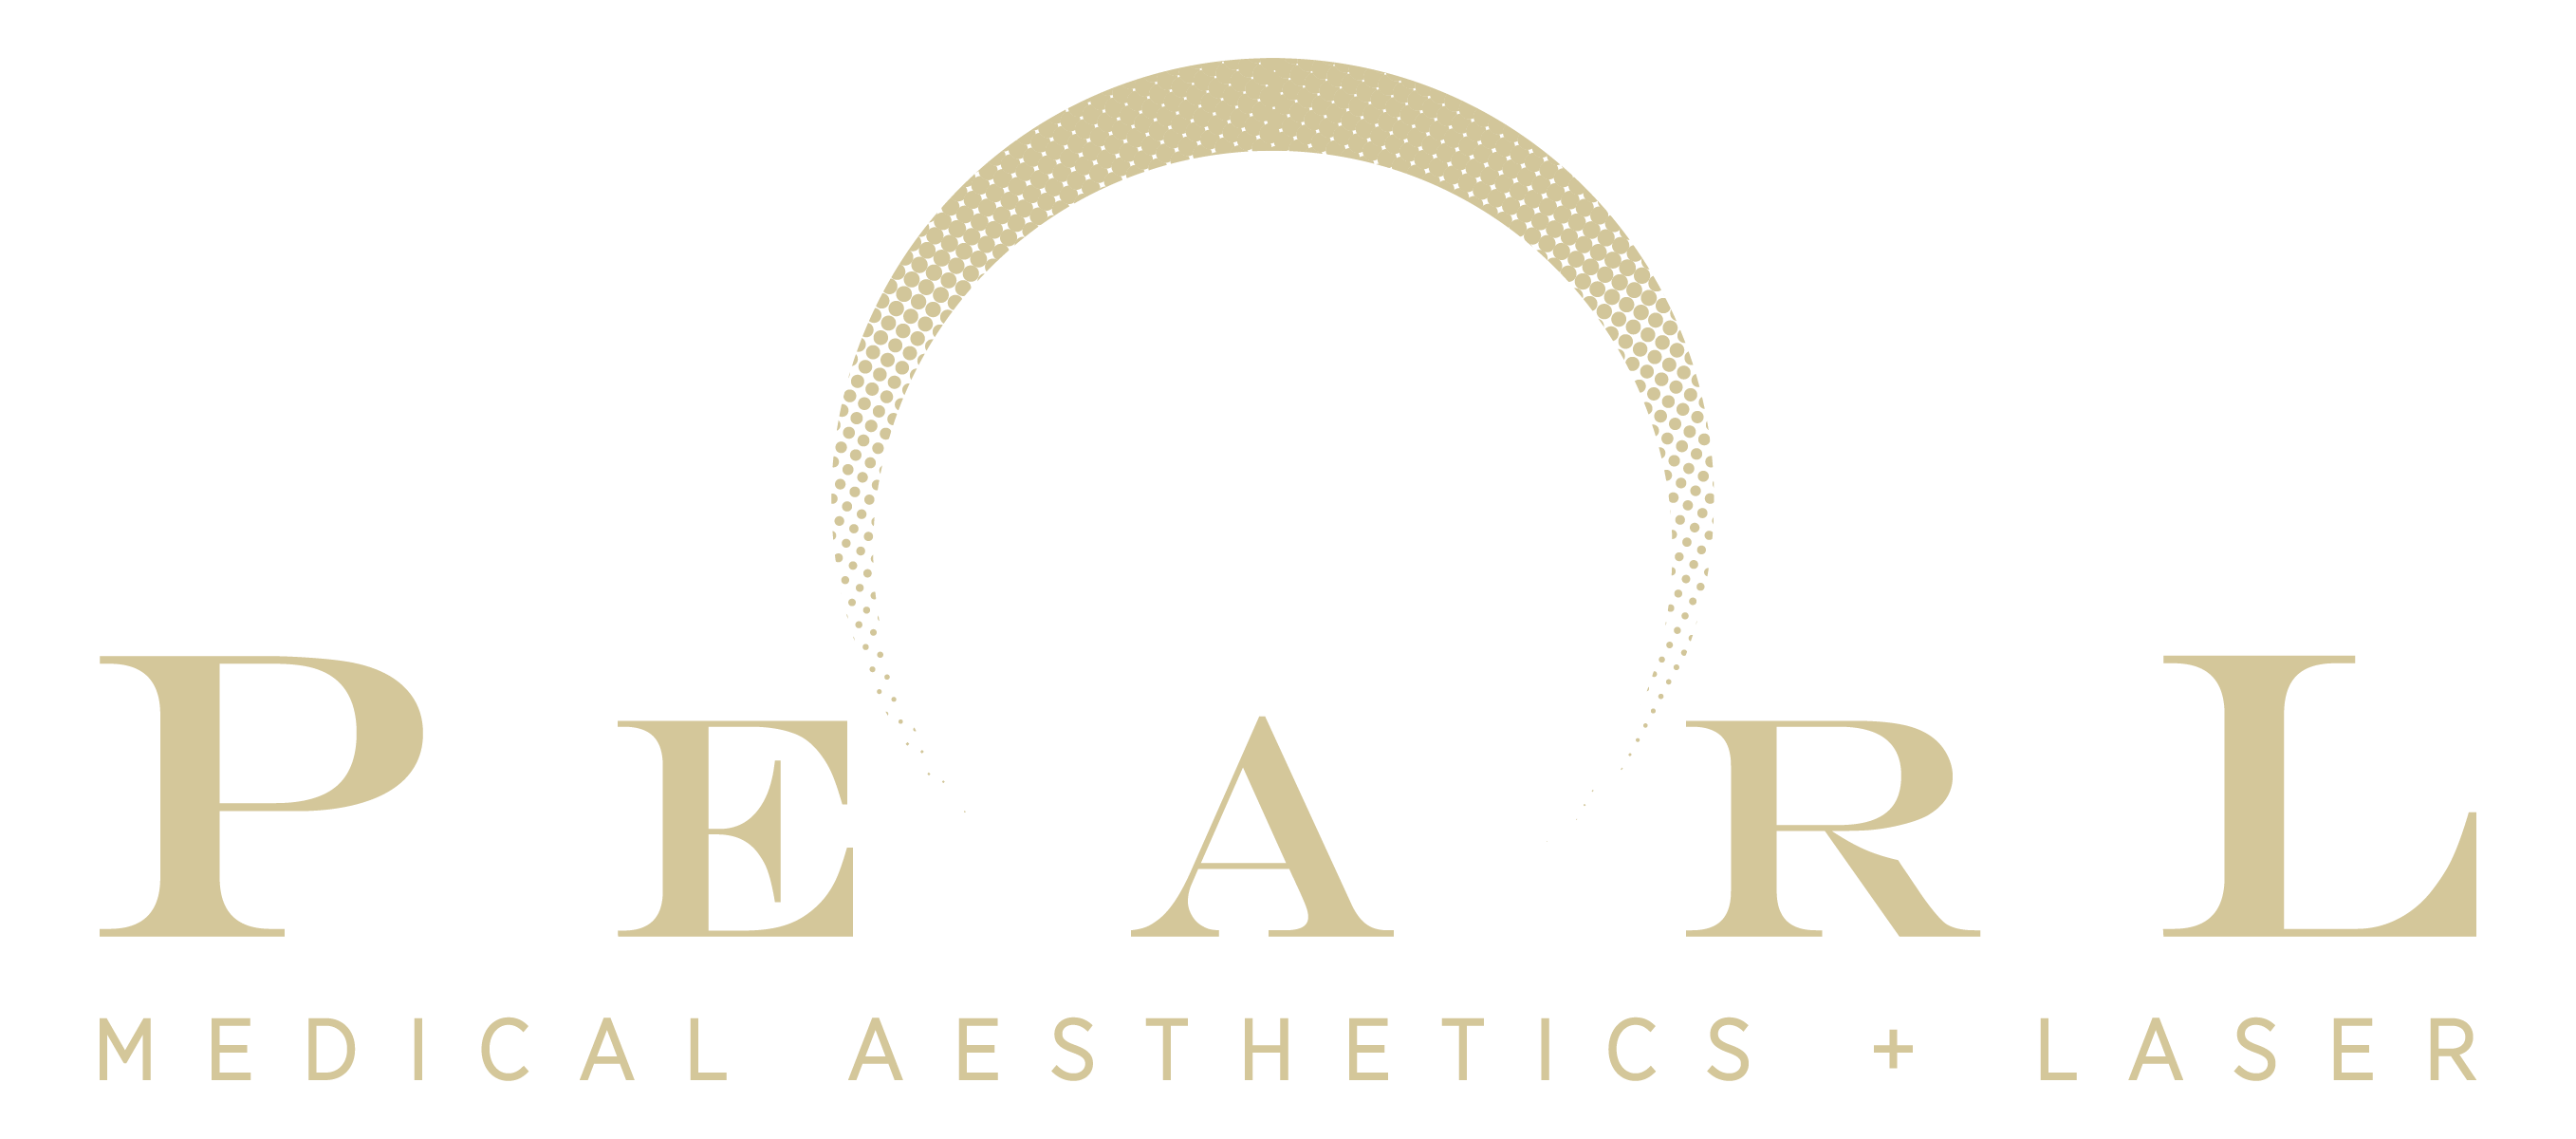 The Pearl Medical Aesthetics & Laser